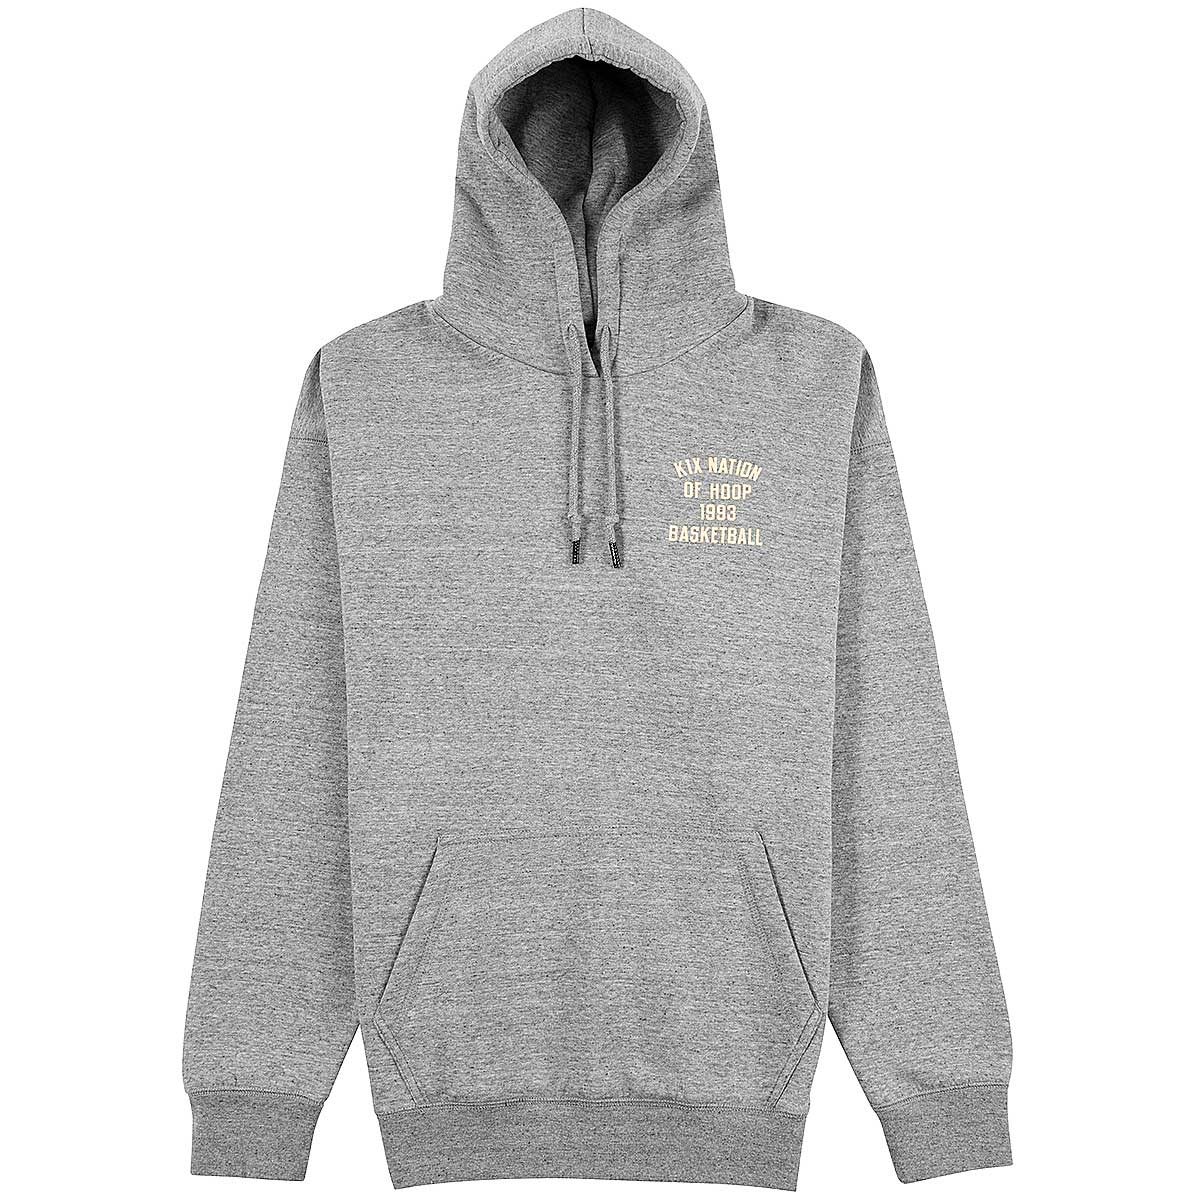 K1X One Court At A Time Hoody, Grey Heather